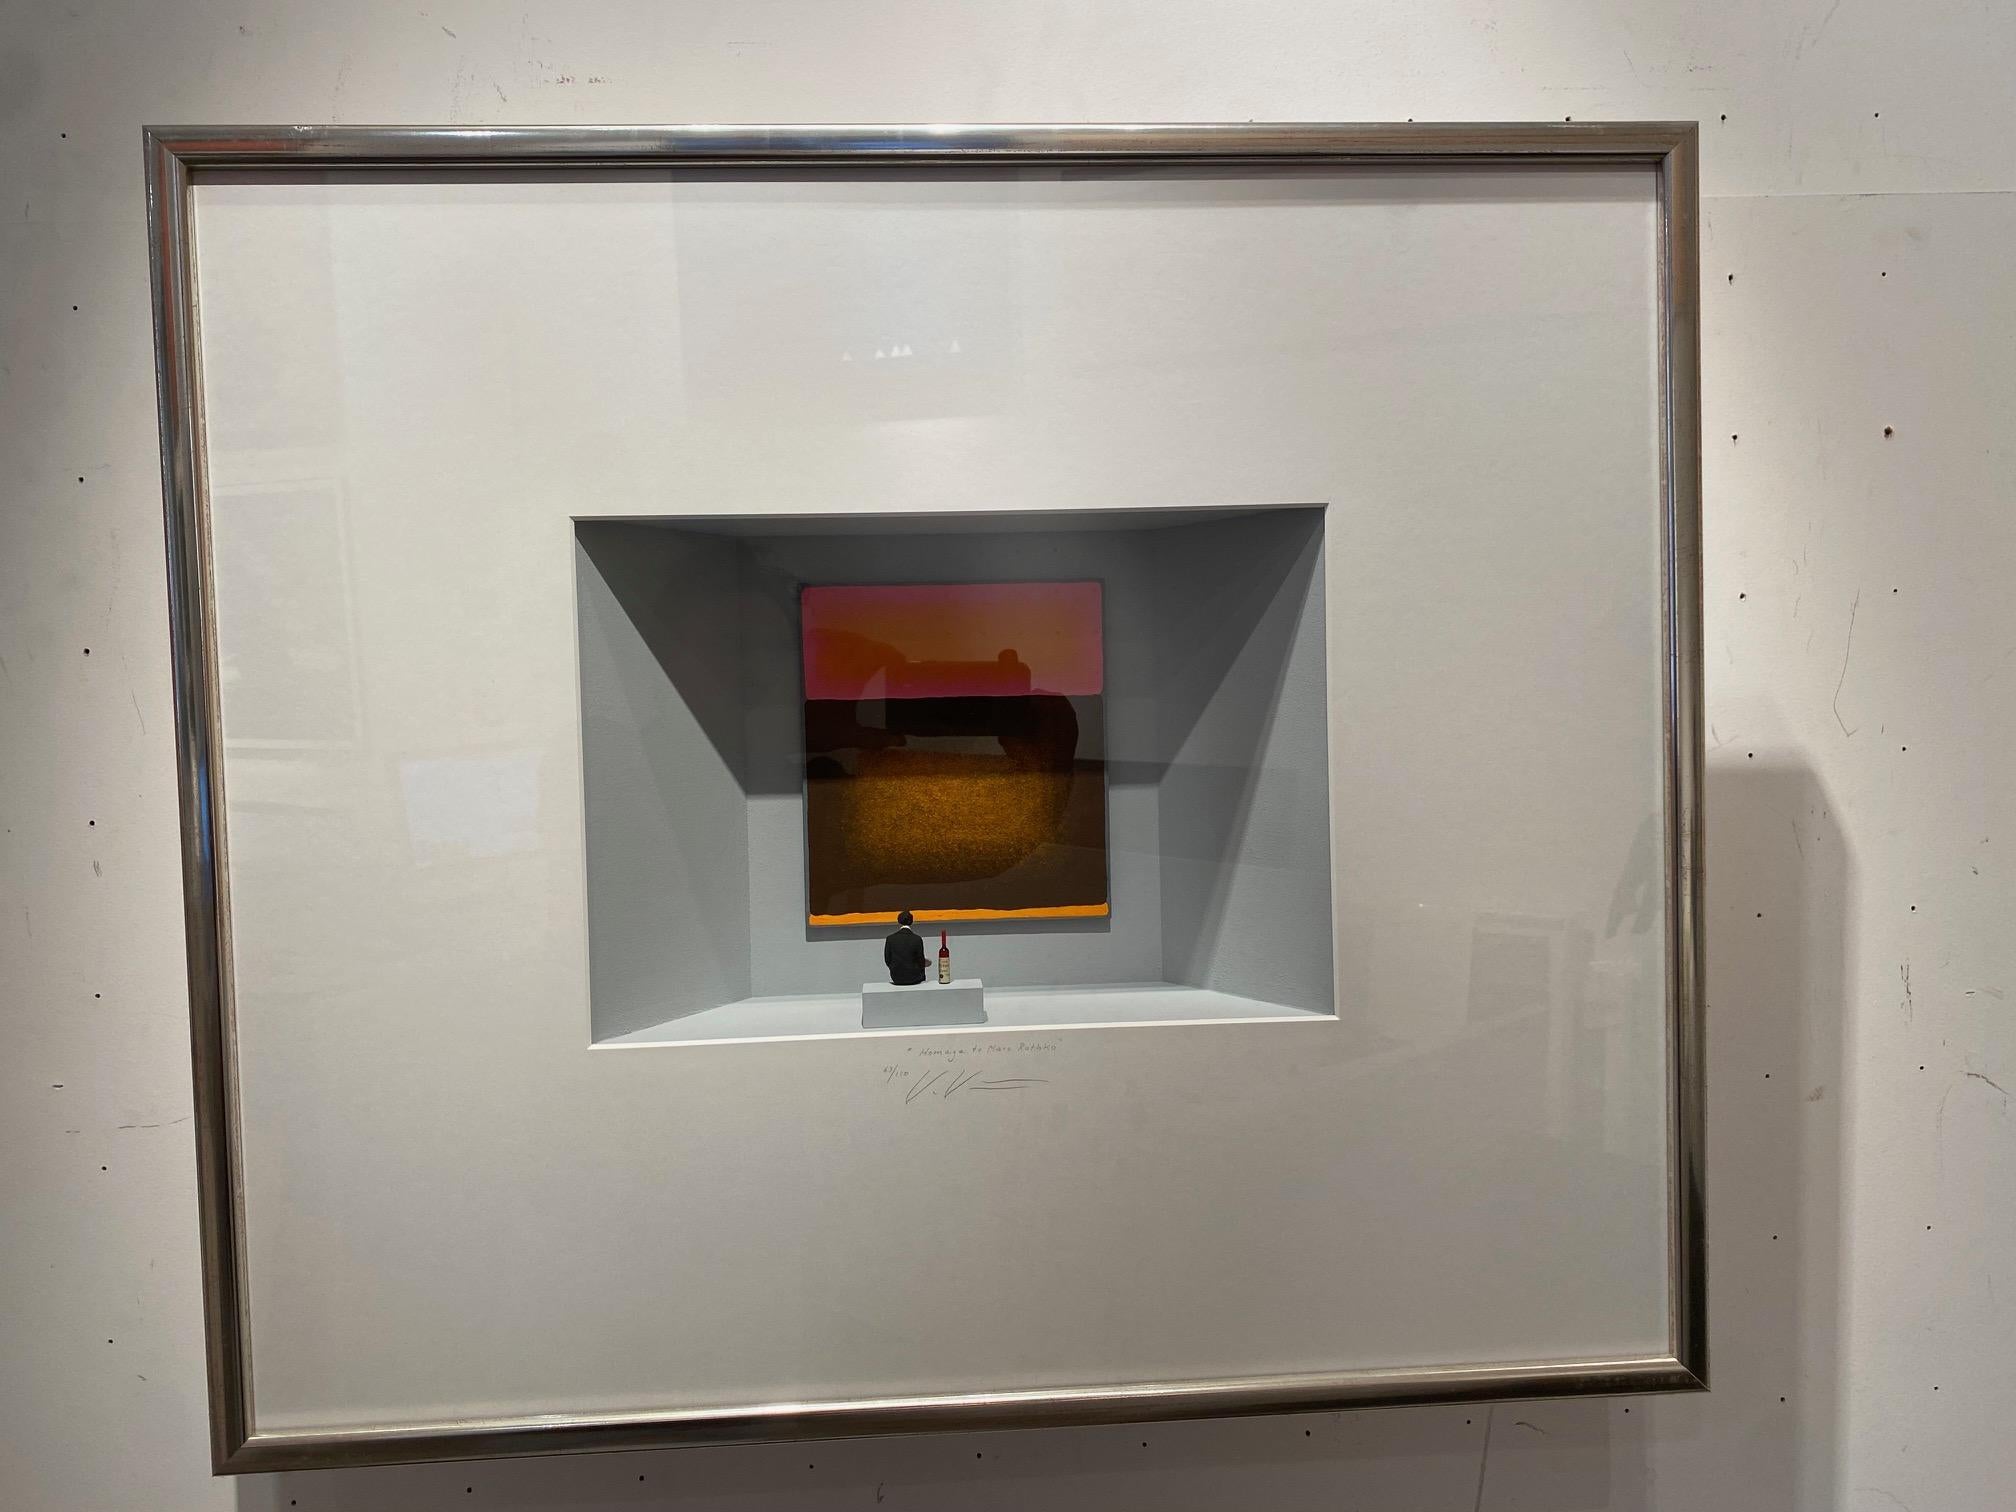 Homage to Rothko-contemporary art in boxes homage to Marc Rothko by Volker Kuhn For Sale 3